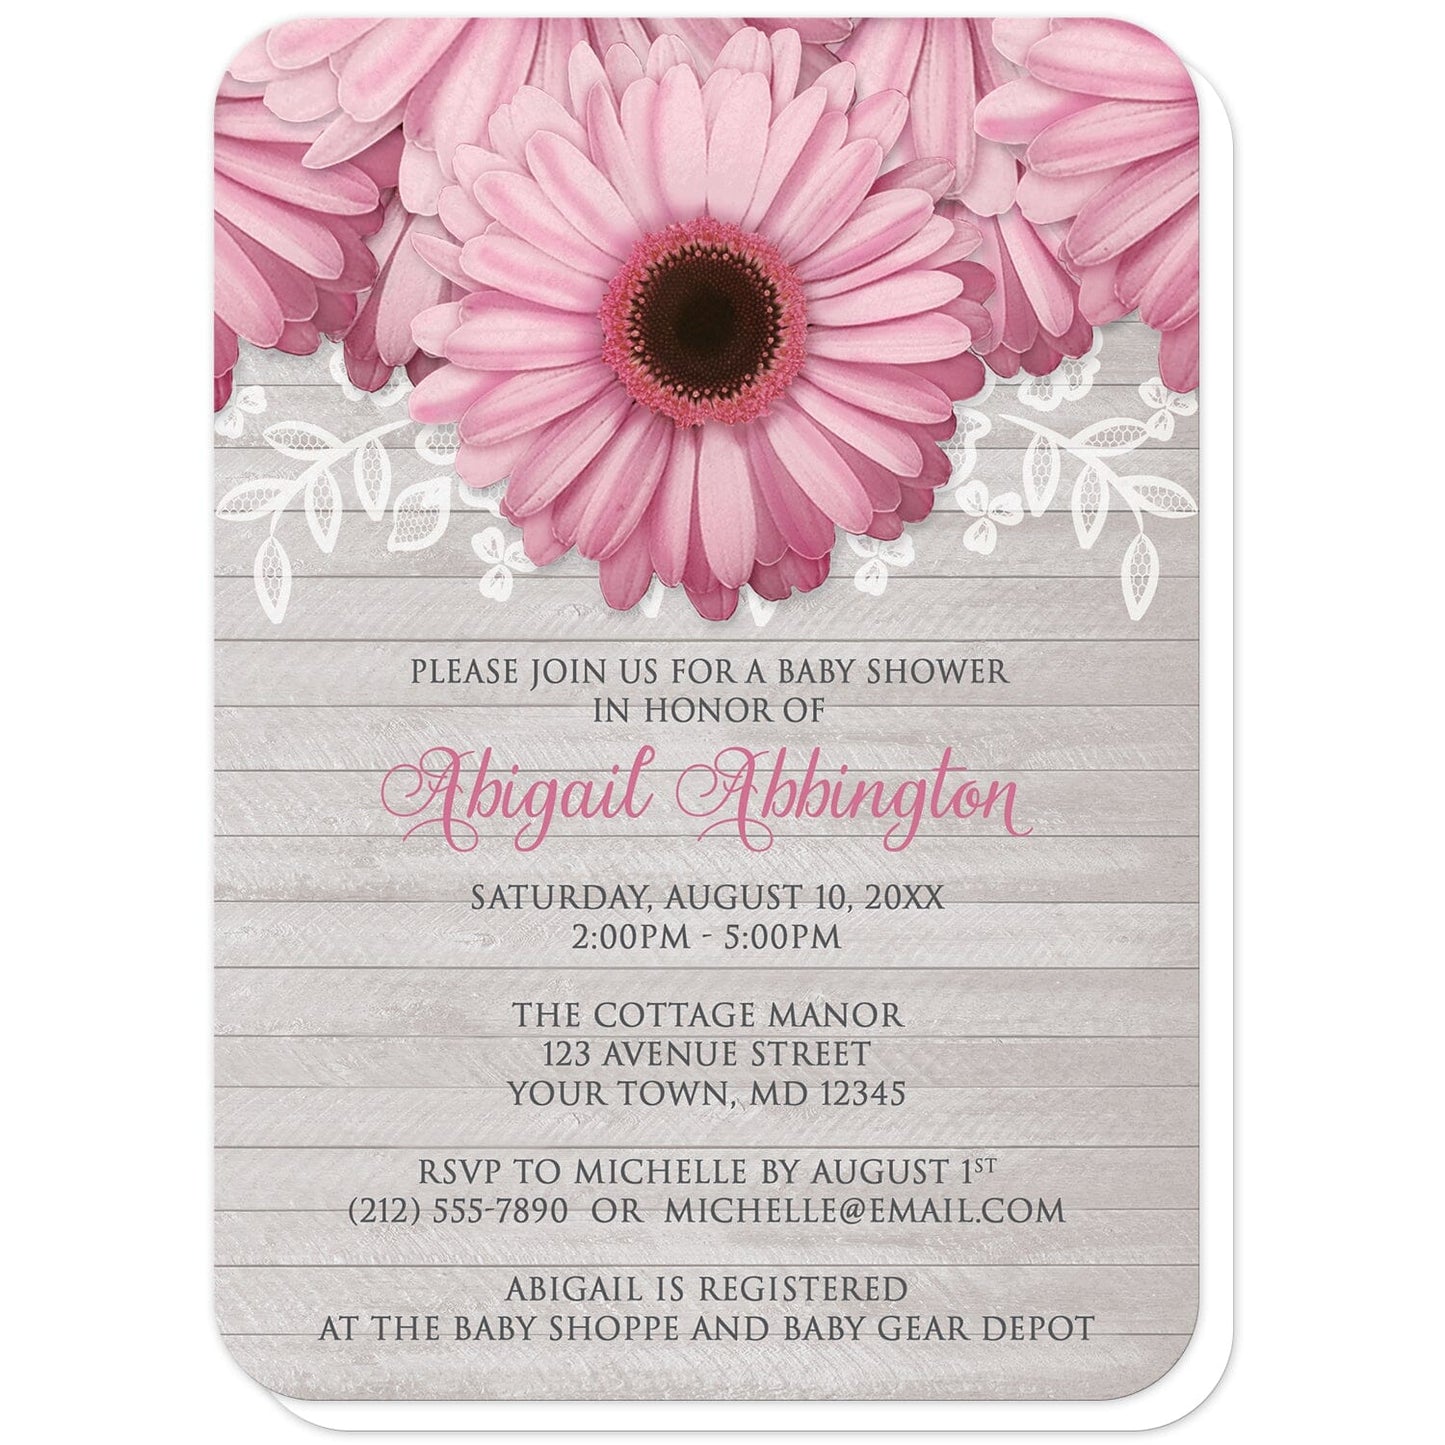 Rustic Pink Daisy Gray Wood Baby Shower Invitations (with rounded corners) at Artistically Invited. Rustic pink daisy gray wood baby shower invitations designed with large and lovely pink daisy flowers with a white lace overlay along the top over a light gray wood background illustration. Your personalized baby shower celebration details are custom printed in pink and dark gray over the wood background design below the pretty pink daisies.